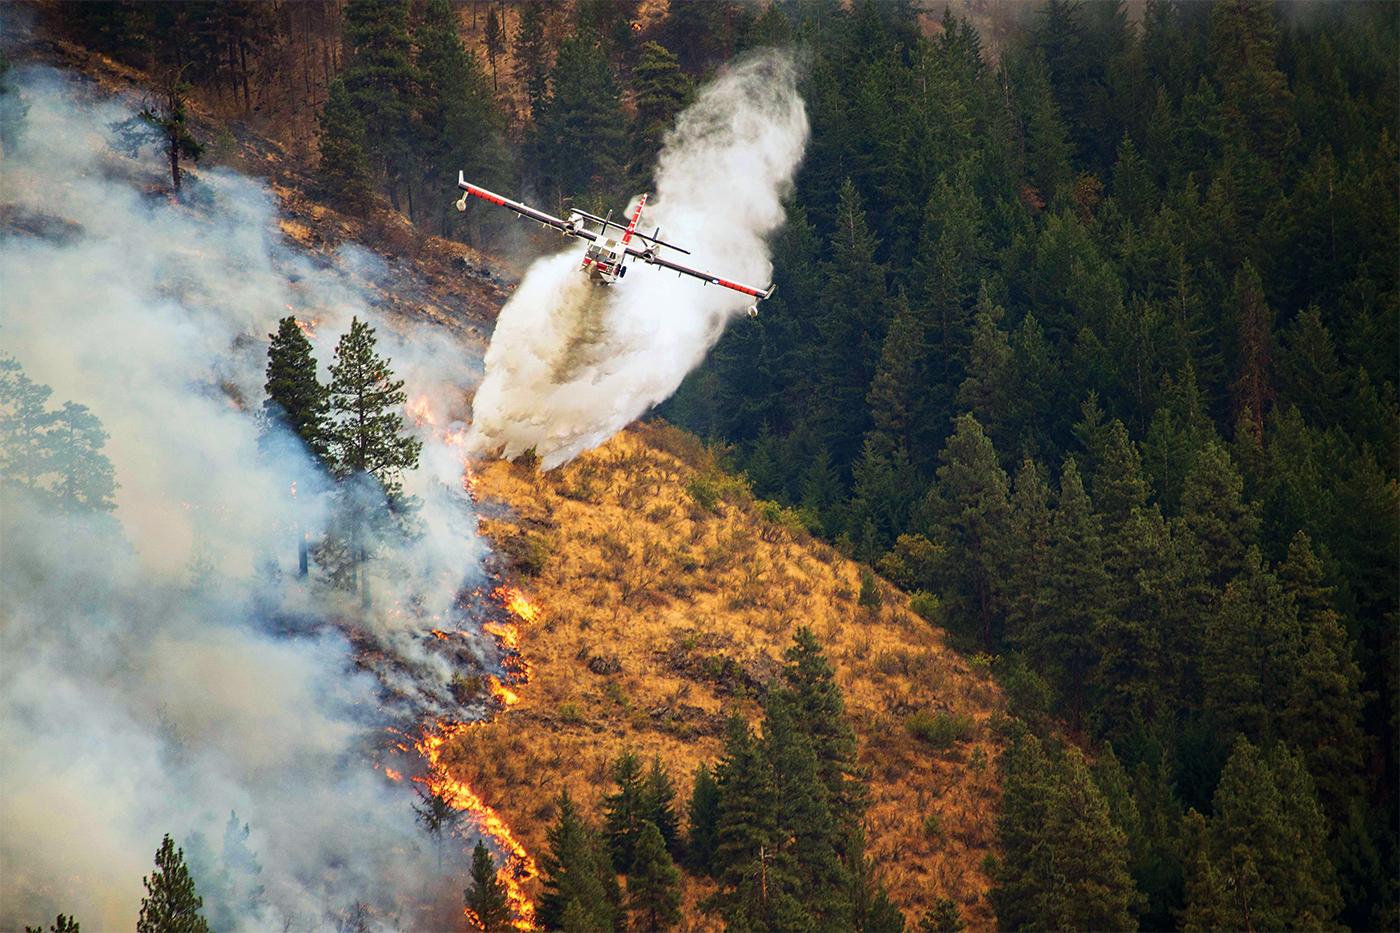 A Canadair CL-415 operated by Conair's U.S. division, Aero-Flite, drops water over a fire in California. U.S. Forest Service Photo